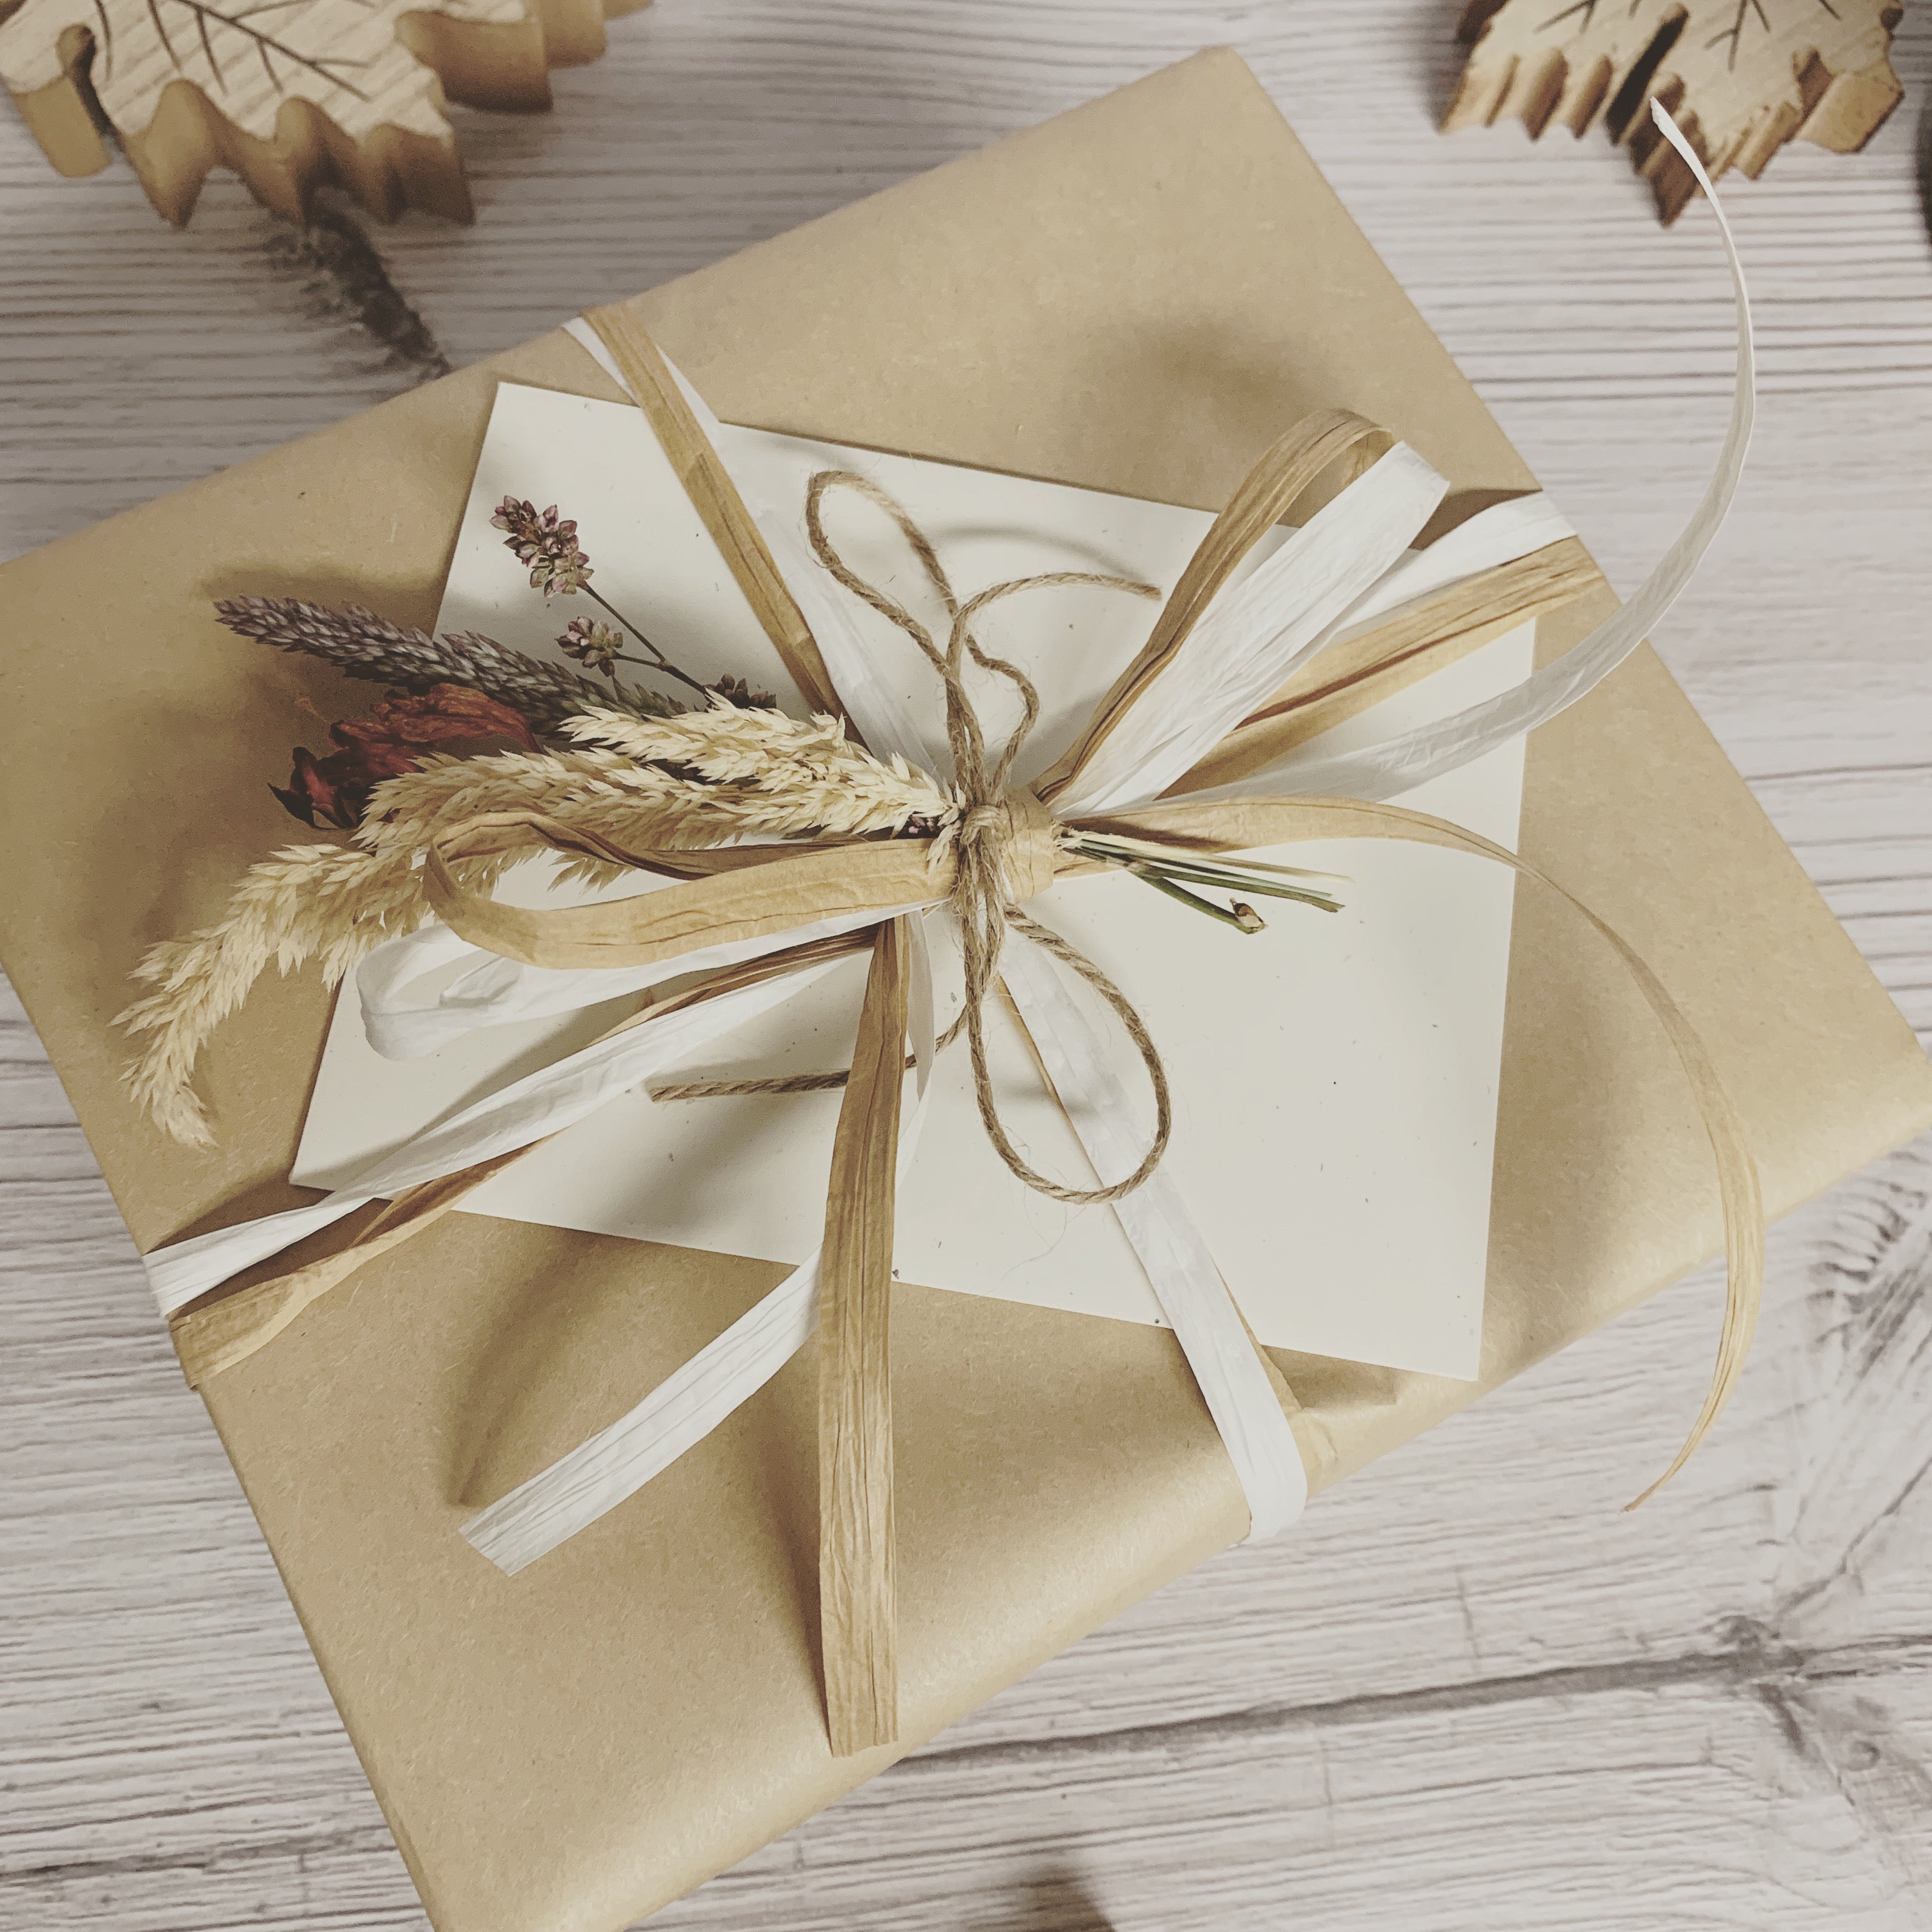 10 Stylish ways to wrap Christmas gifts with brown paper - mamas V.I.B